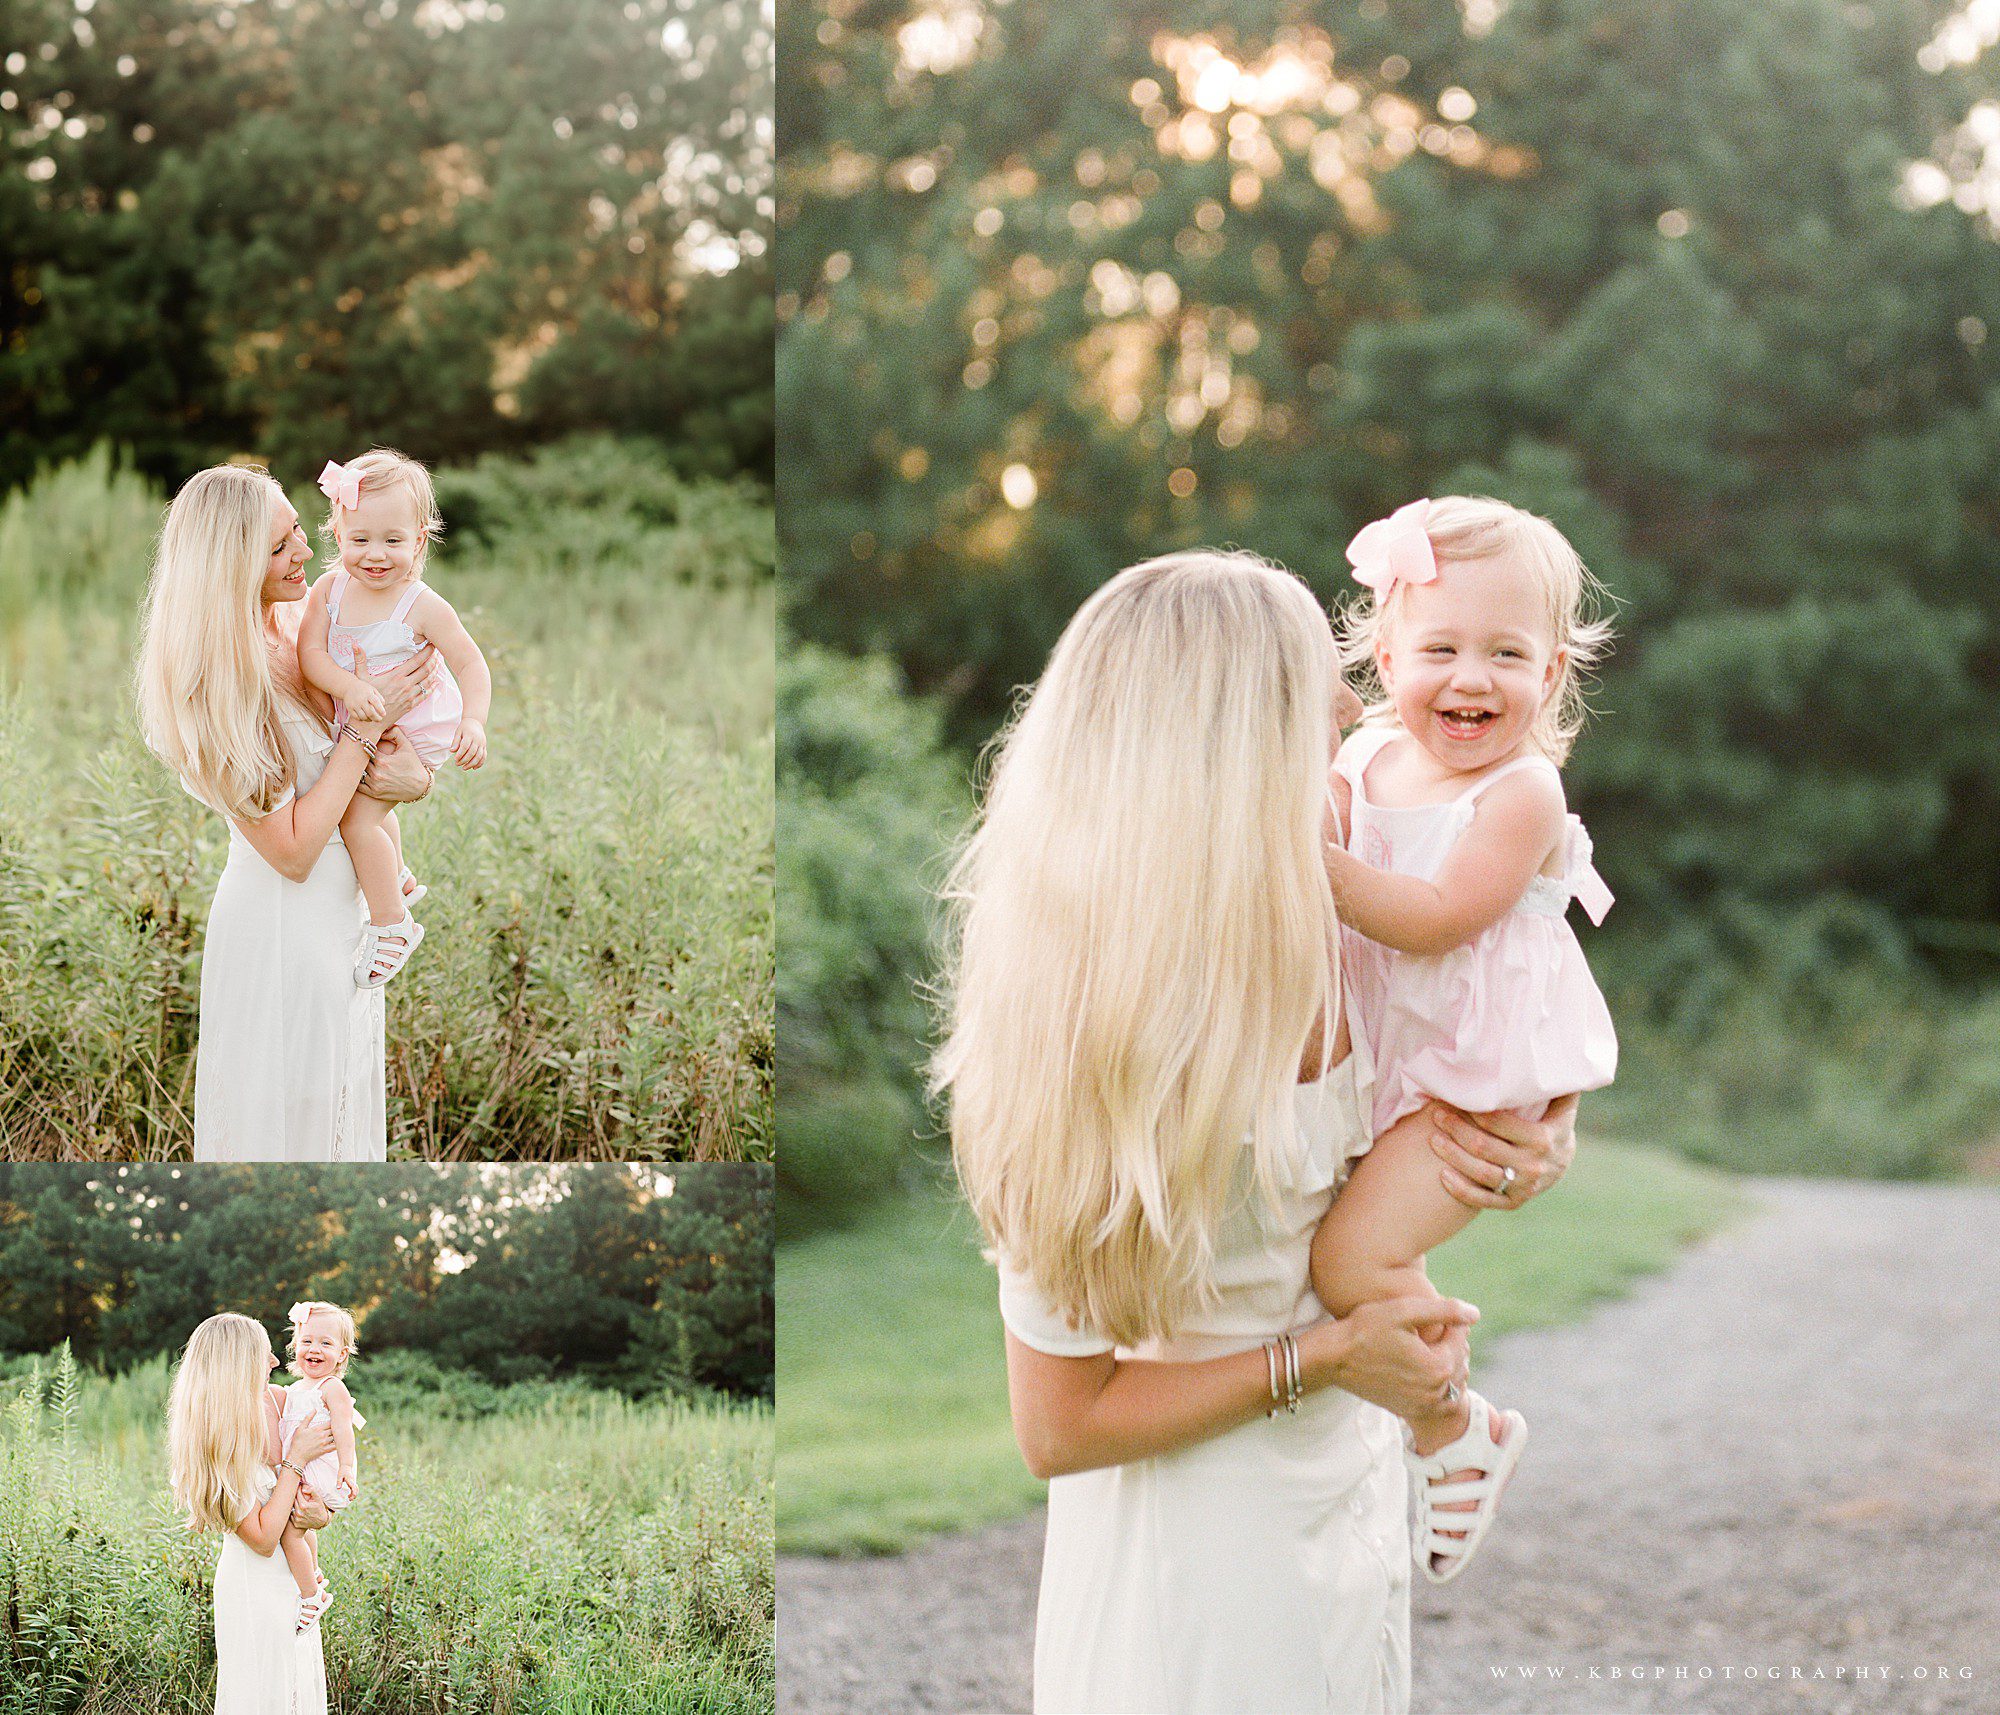 marietta family film photographer - mom and daughter playing in the field